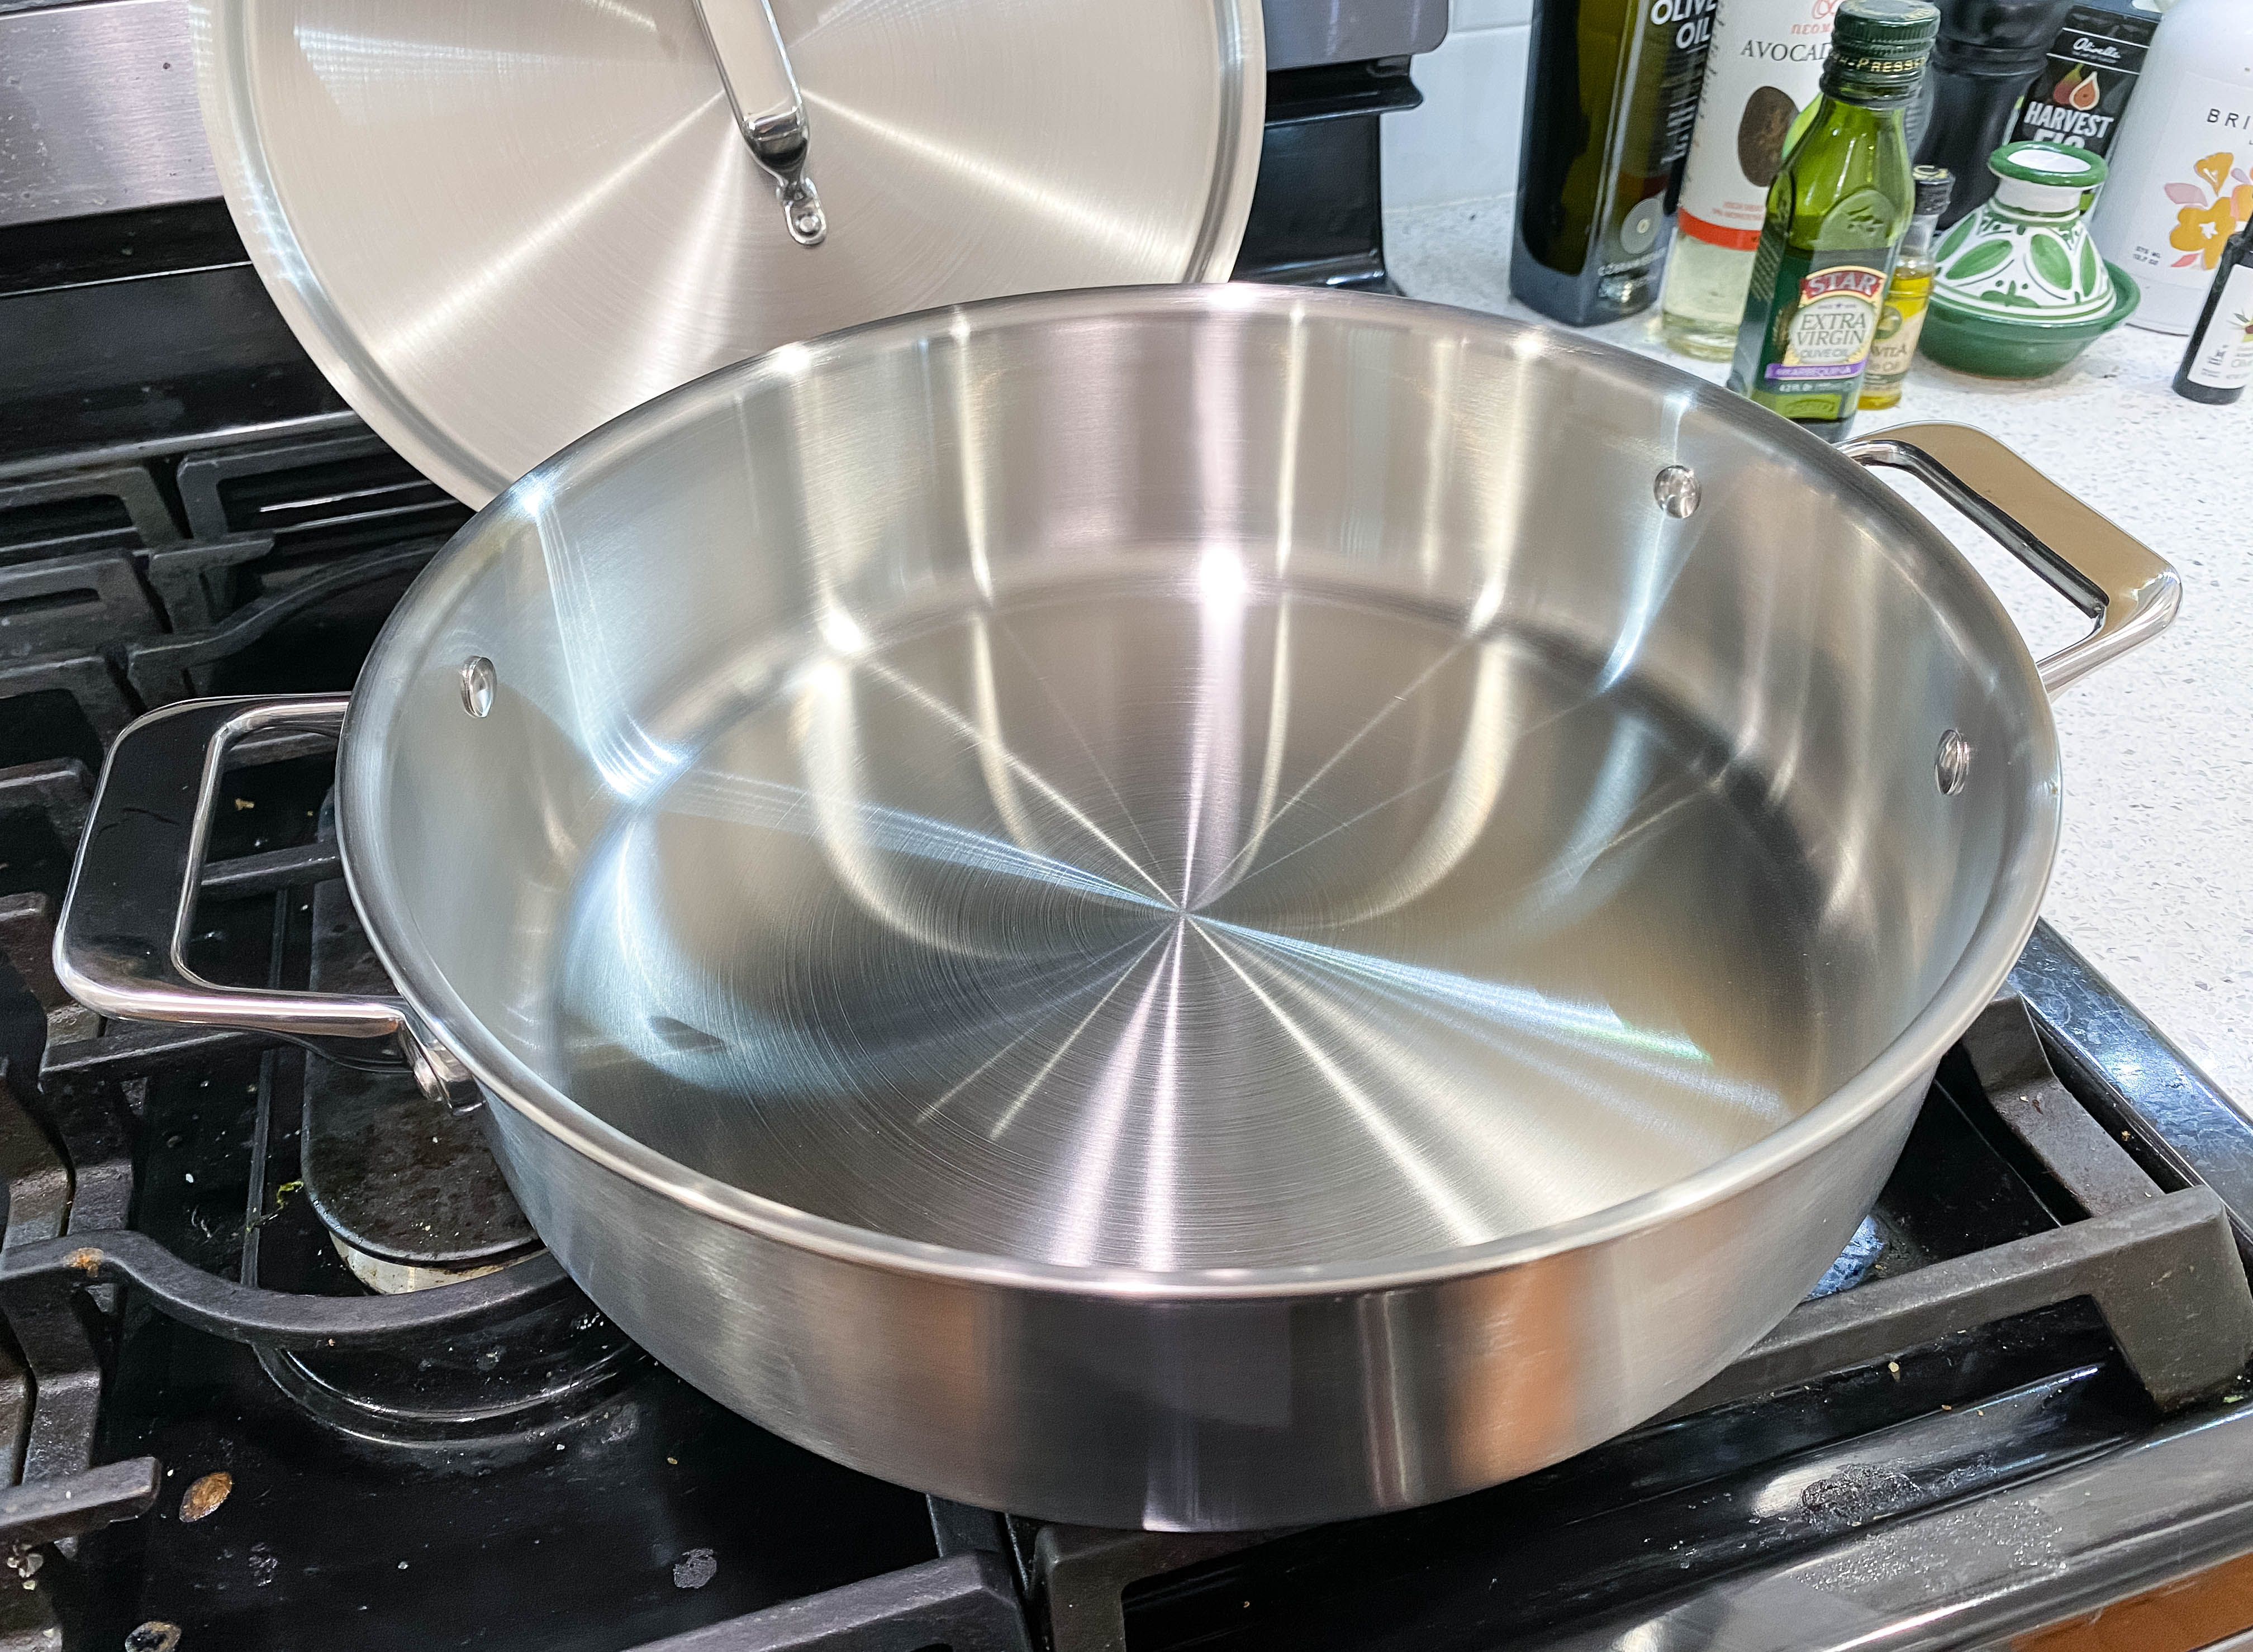 Misen Stainless Steel Pan Review